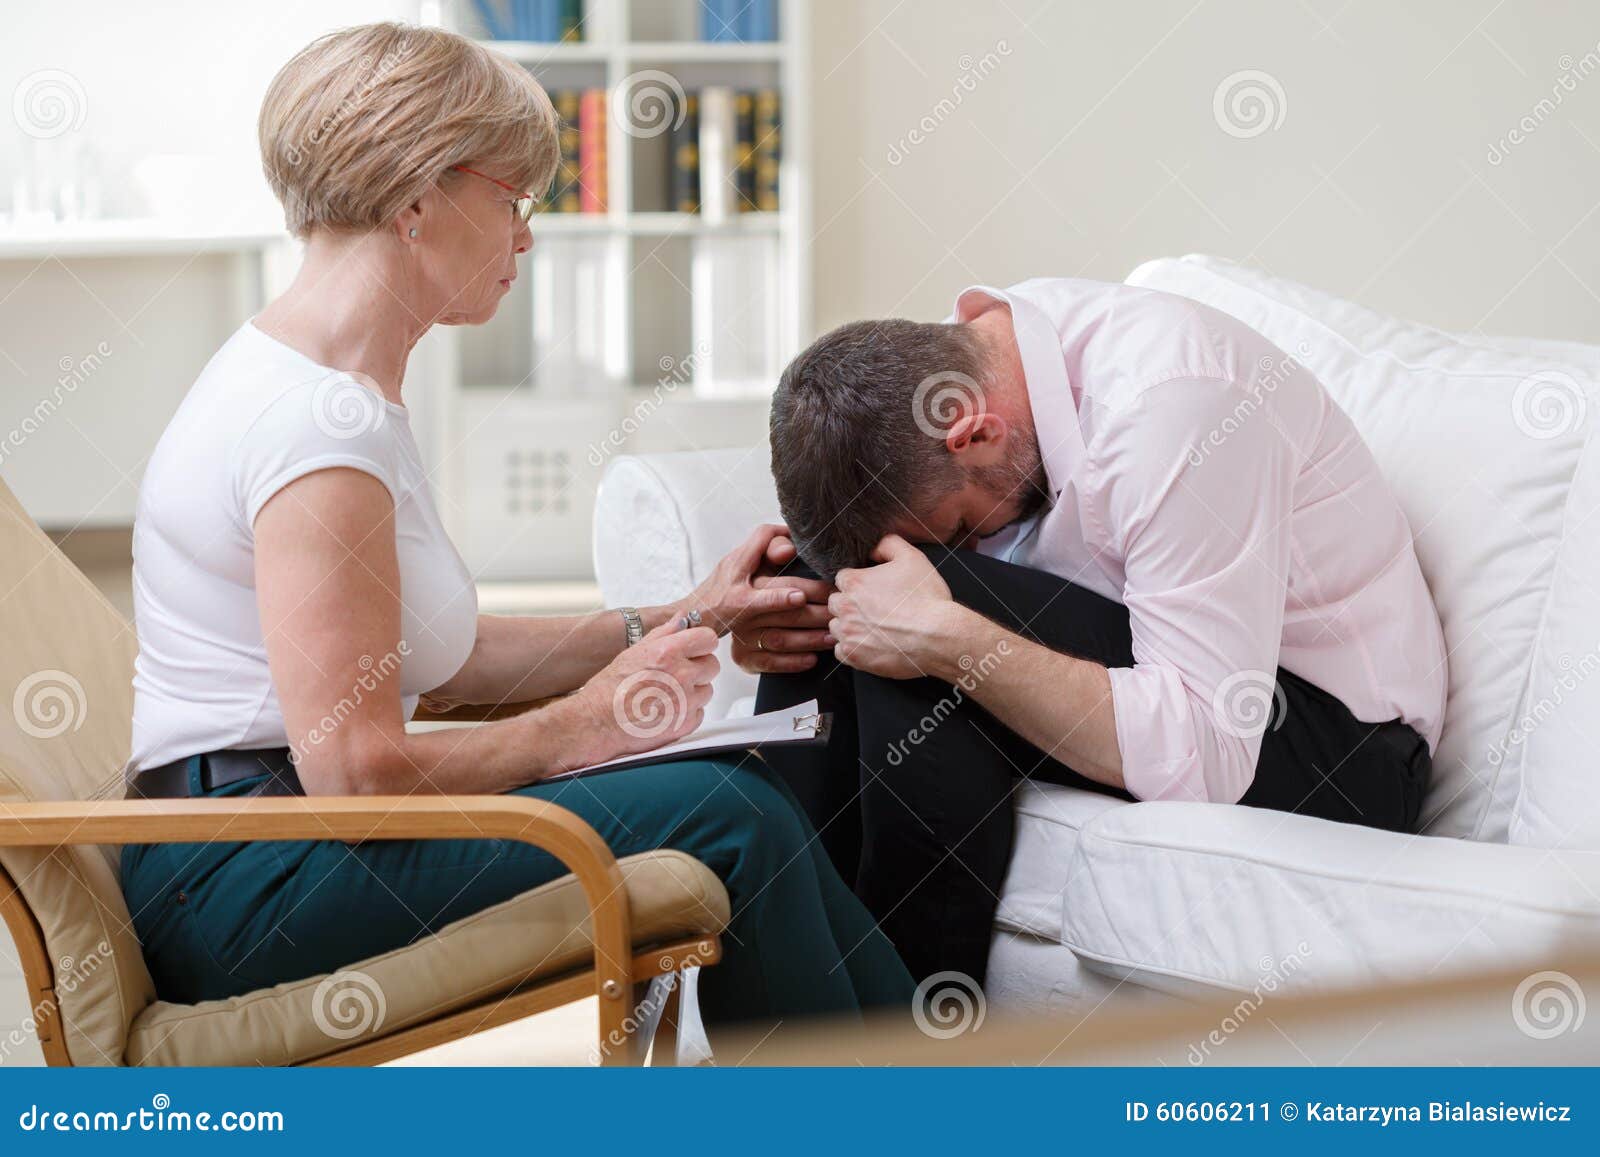 man-crying-psychological-therapy-middle-aged-men-60606211.jpg